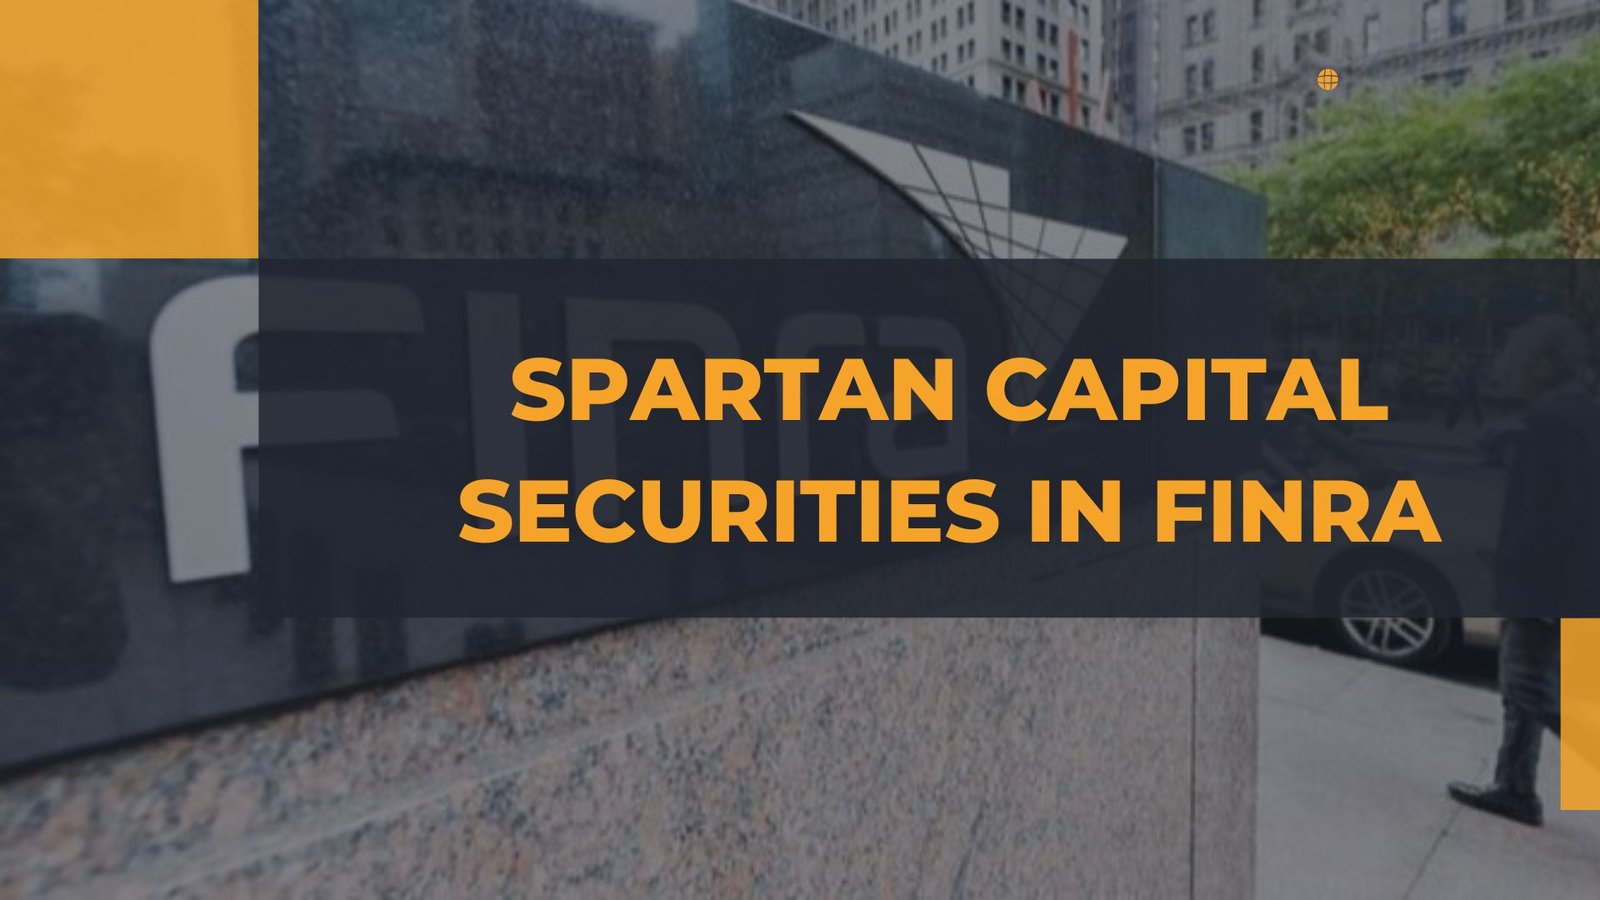 Spartan Capital Securities in FINRA